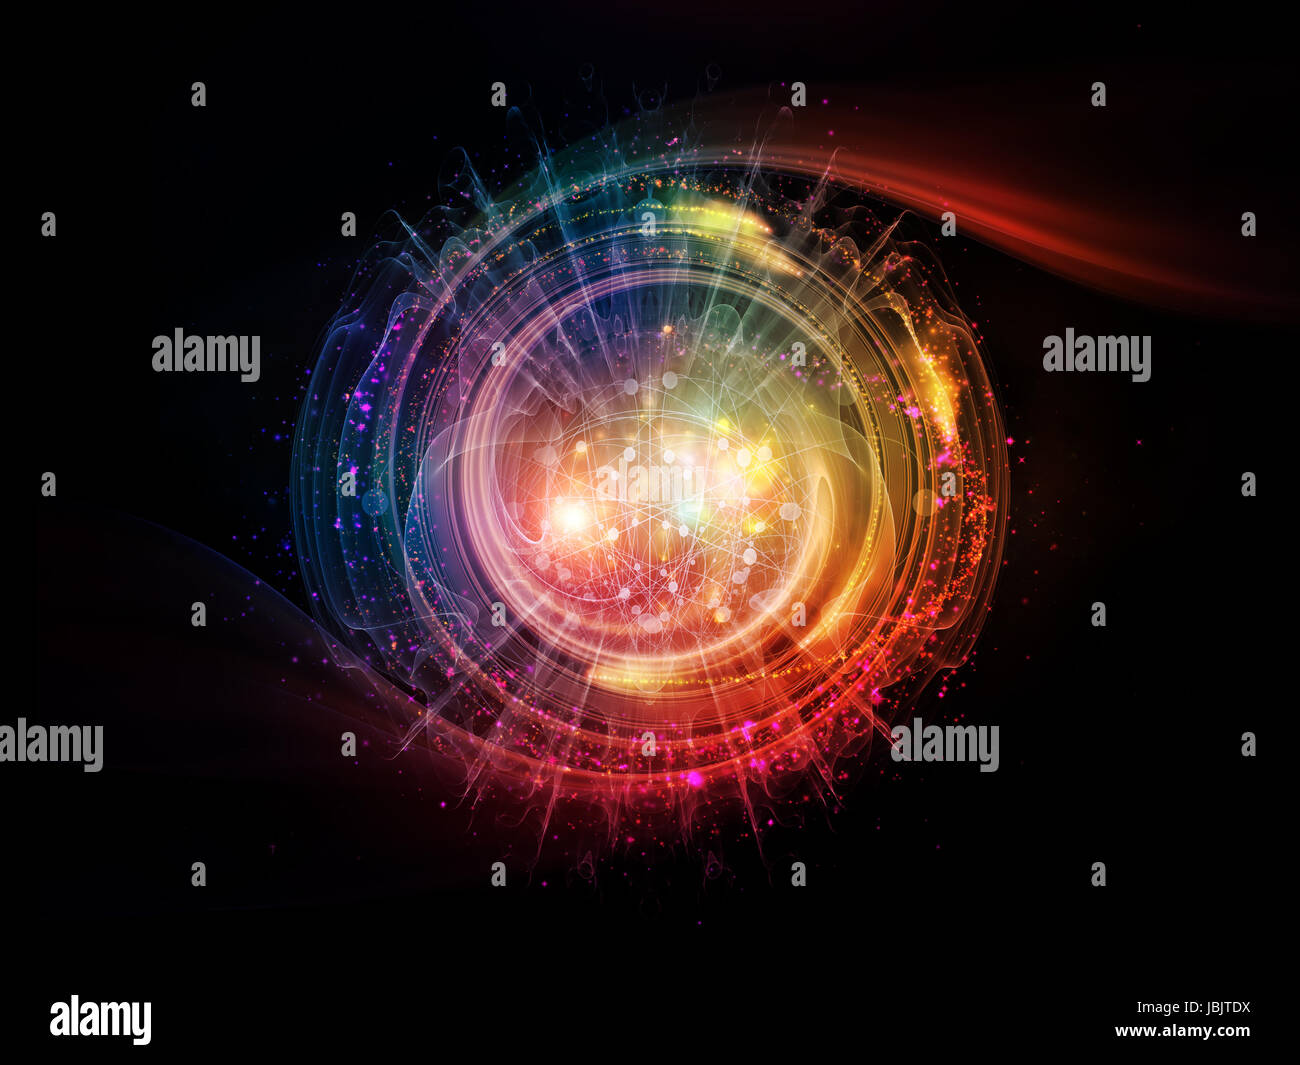 Atomic series. Abstract concept of atom and quantum waves illustrated with fractal elements Stock Photo